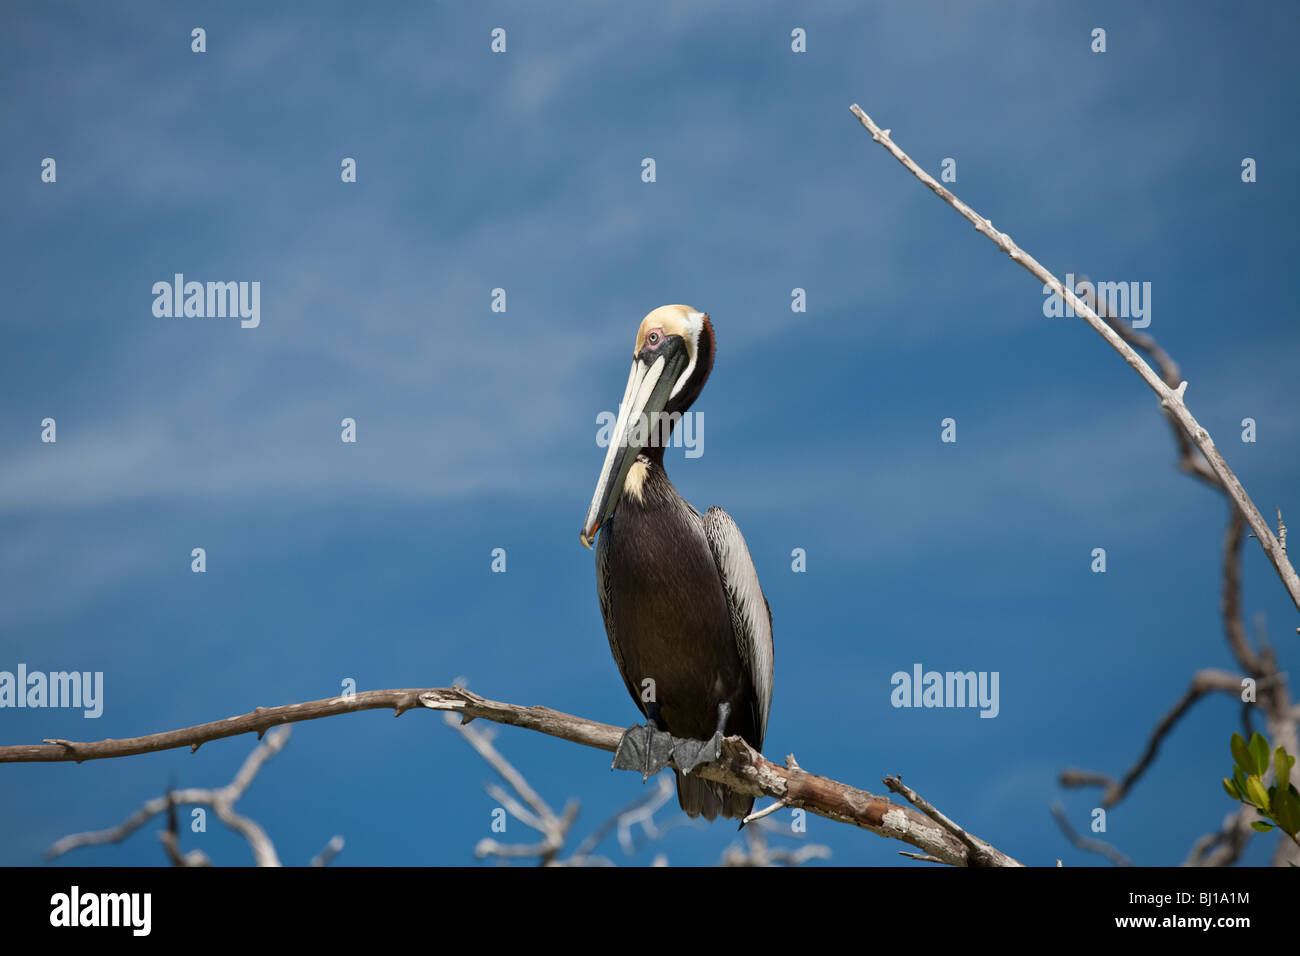 A mature brown pelican in the Rio Lagardos reserve. A brown pelican sits high above the Rio scanning the water for prey. Stock Photo